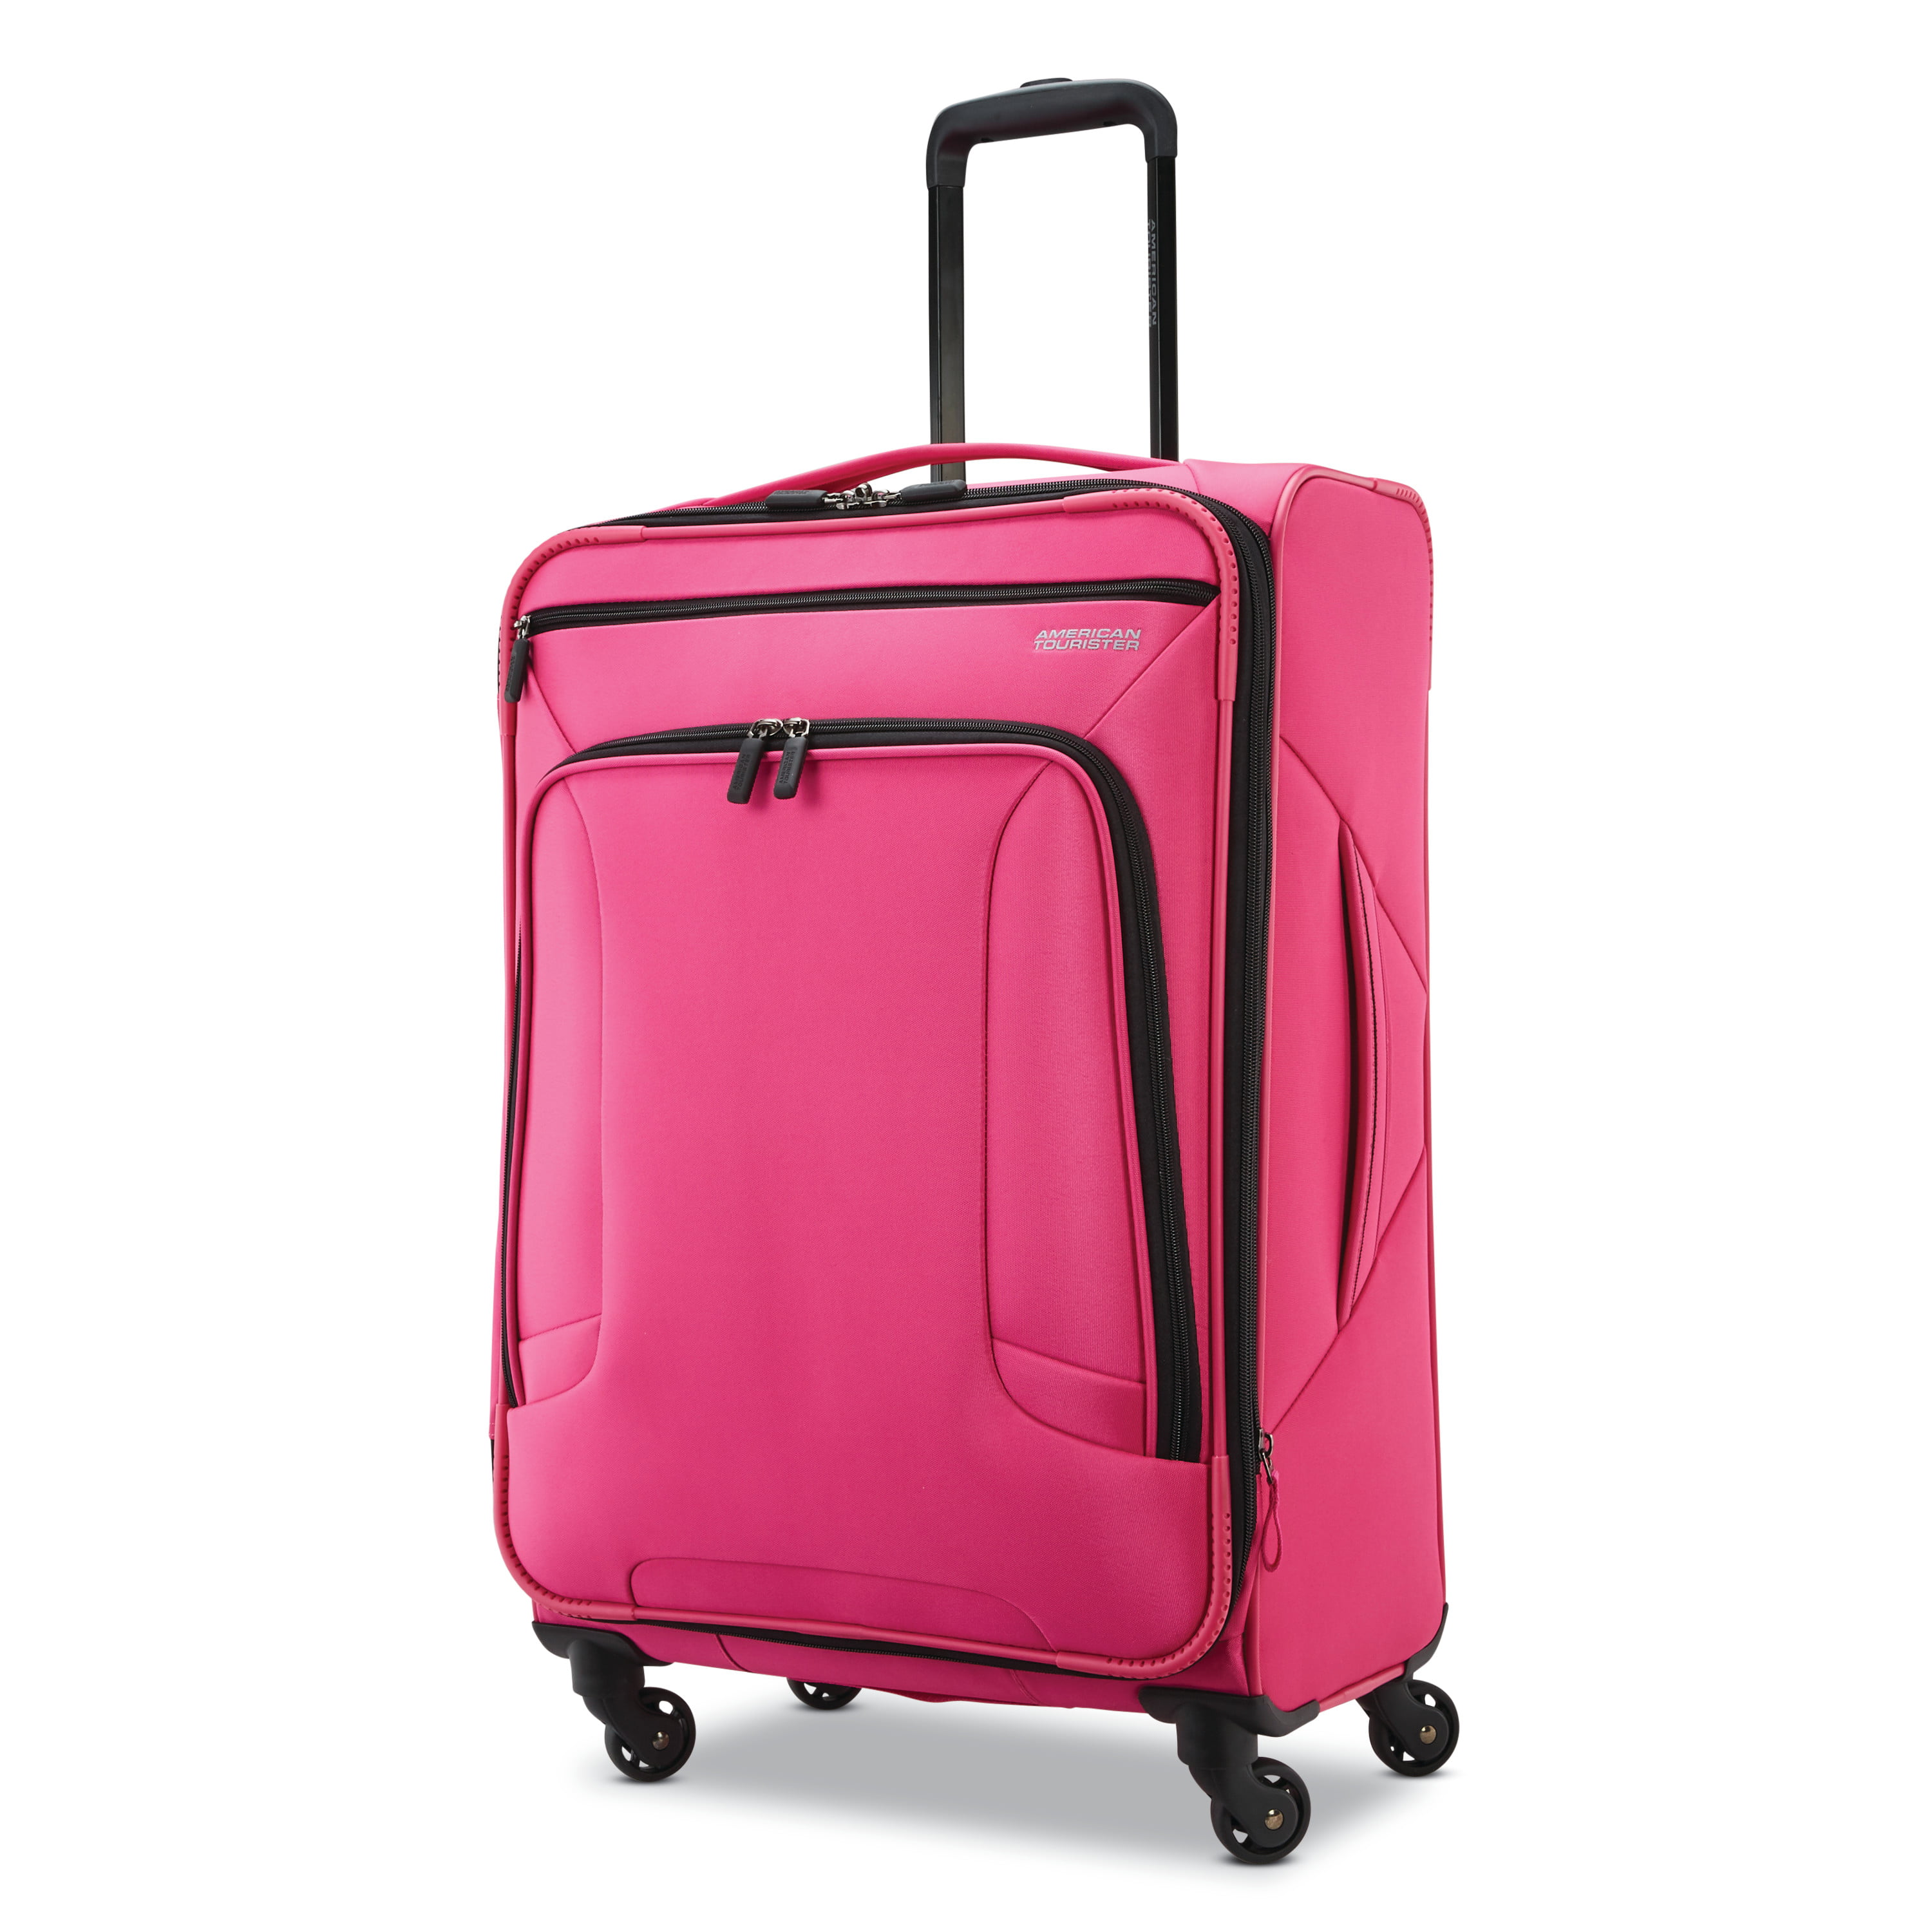 American Tourister Ally 29" Softside Spinner Luggage Walmart.com